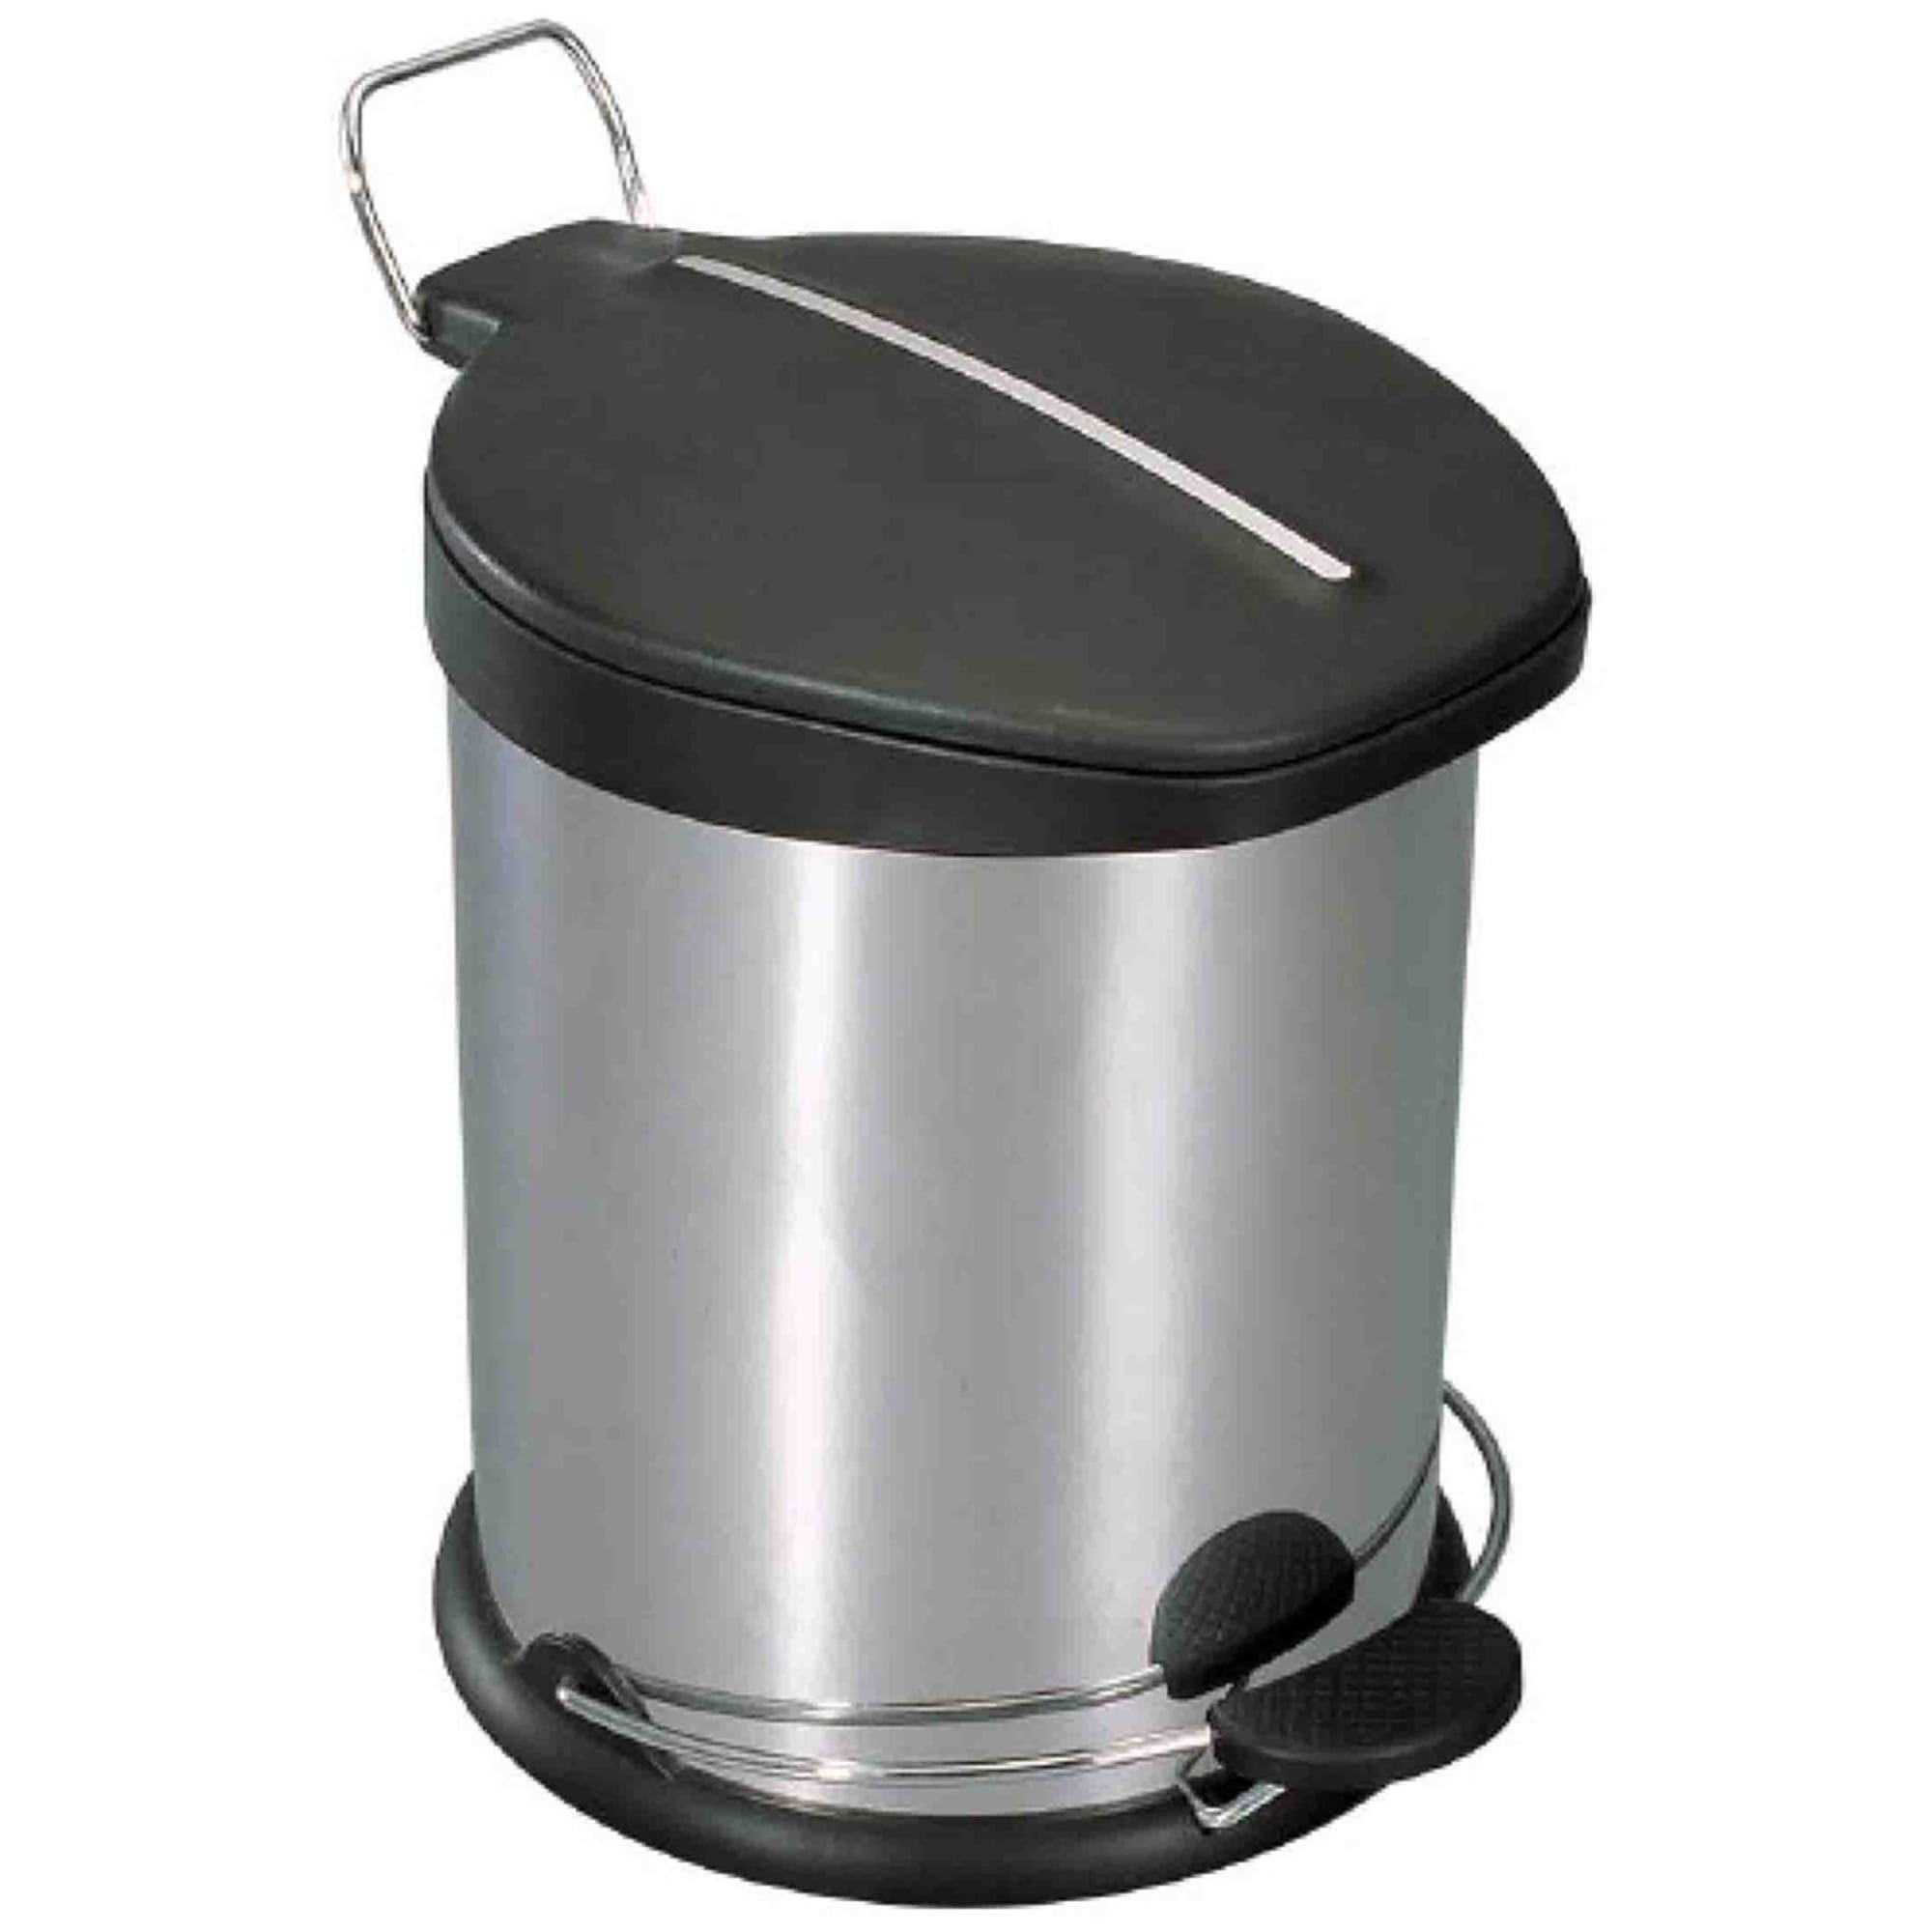 Home Basics 5 Liter Brushed Stainless Steel  with Plastic Top Waste Bin, Silver $10.00 EACH, CASE PACK OF 6